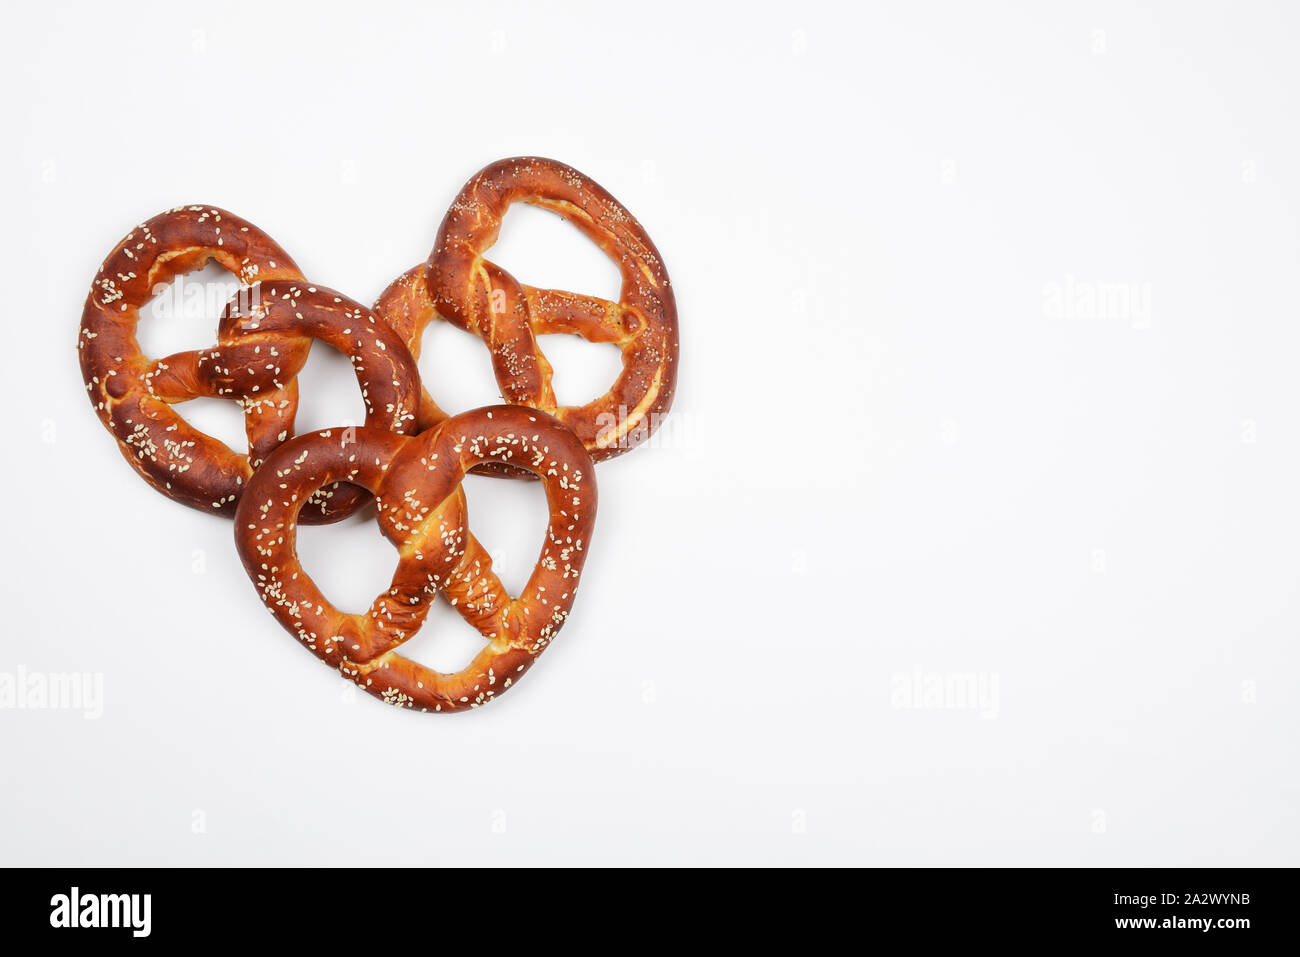 The hand-made pretzels for Octoberfest party on white background Stock Photo